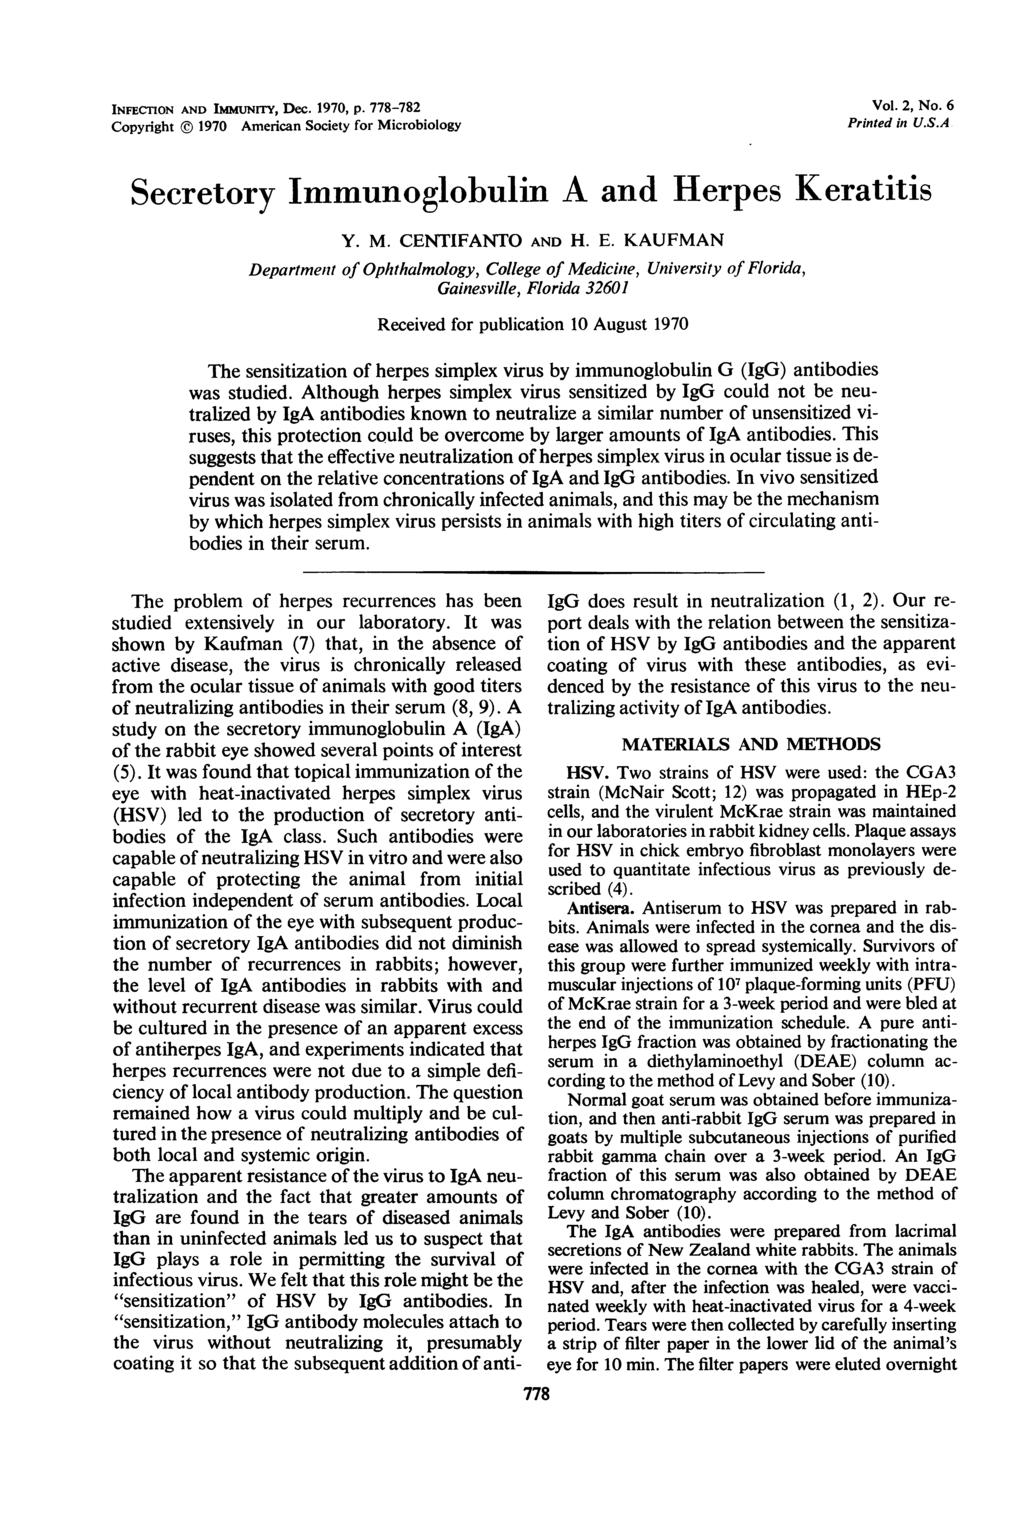 INFECTION AND IMMuNrnr, Dec. 1970, p. 778-782 Copyright 1970 American Society for Microbiology Vol. 2, No. 6 Printed in U.S.A Secretory Immunoglobulin A and Herpes Keratitis Y. M. CENTIFANTO AND H. E.